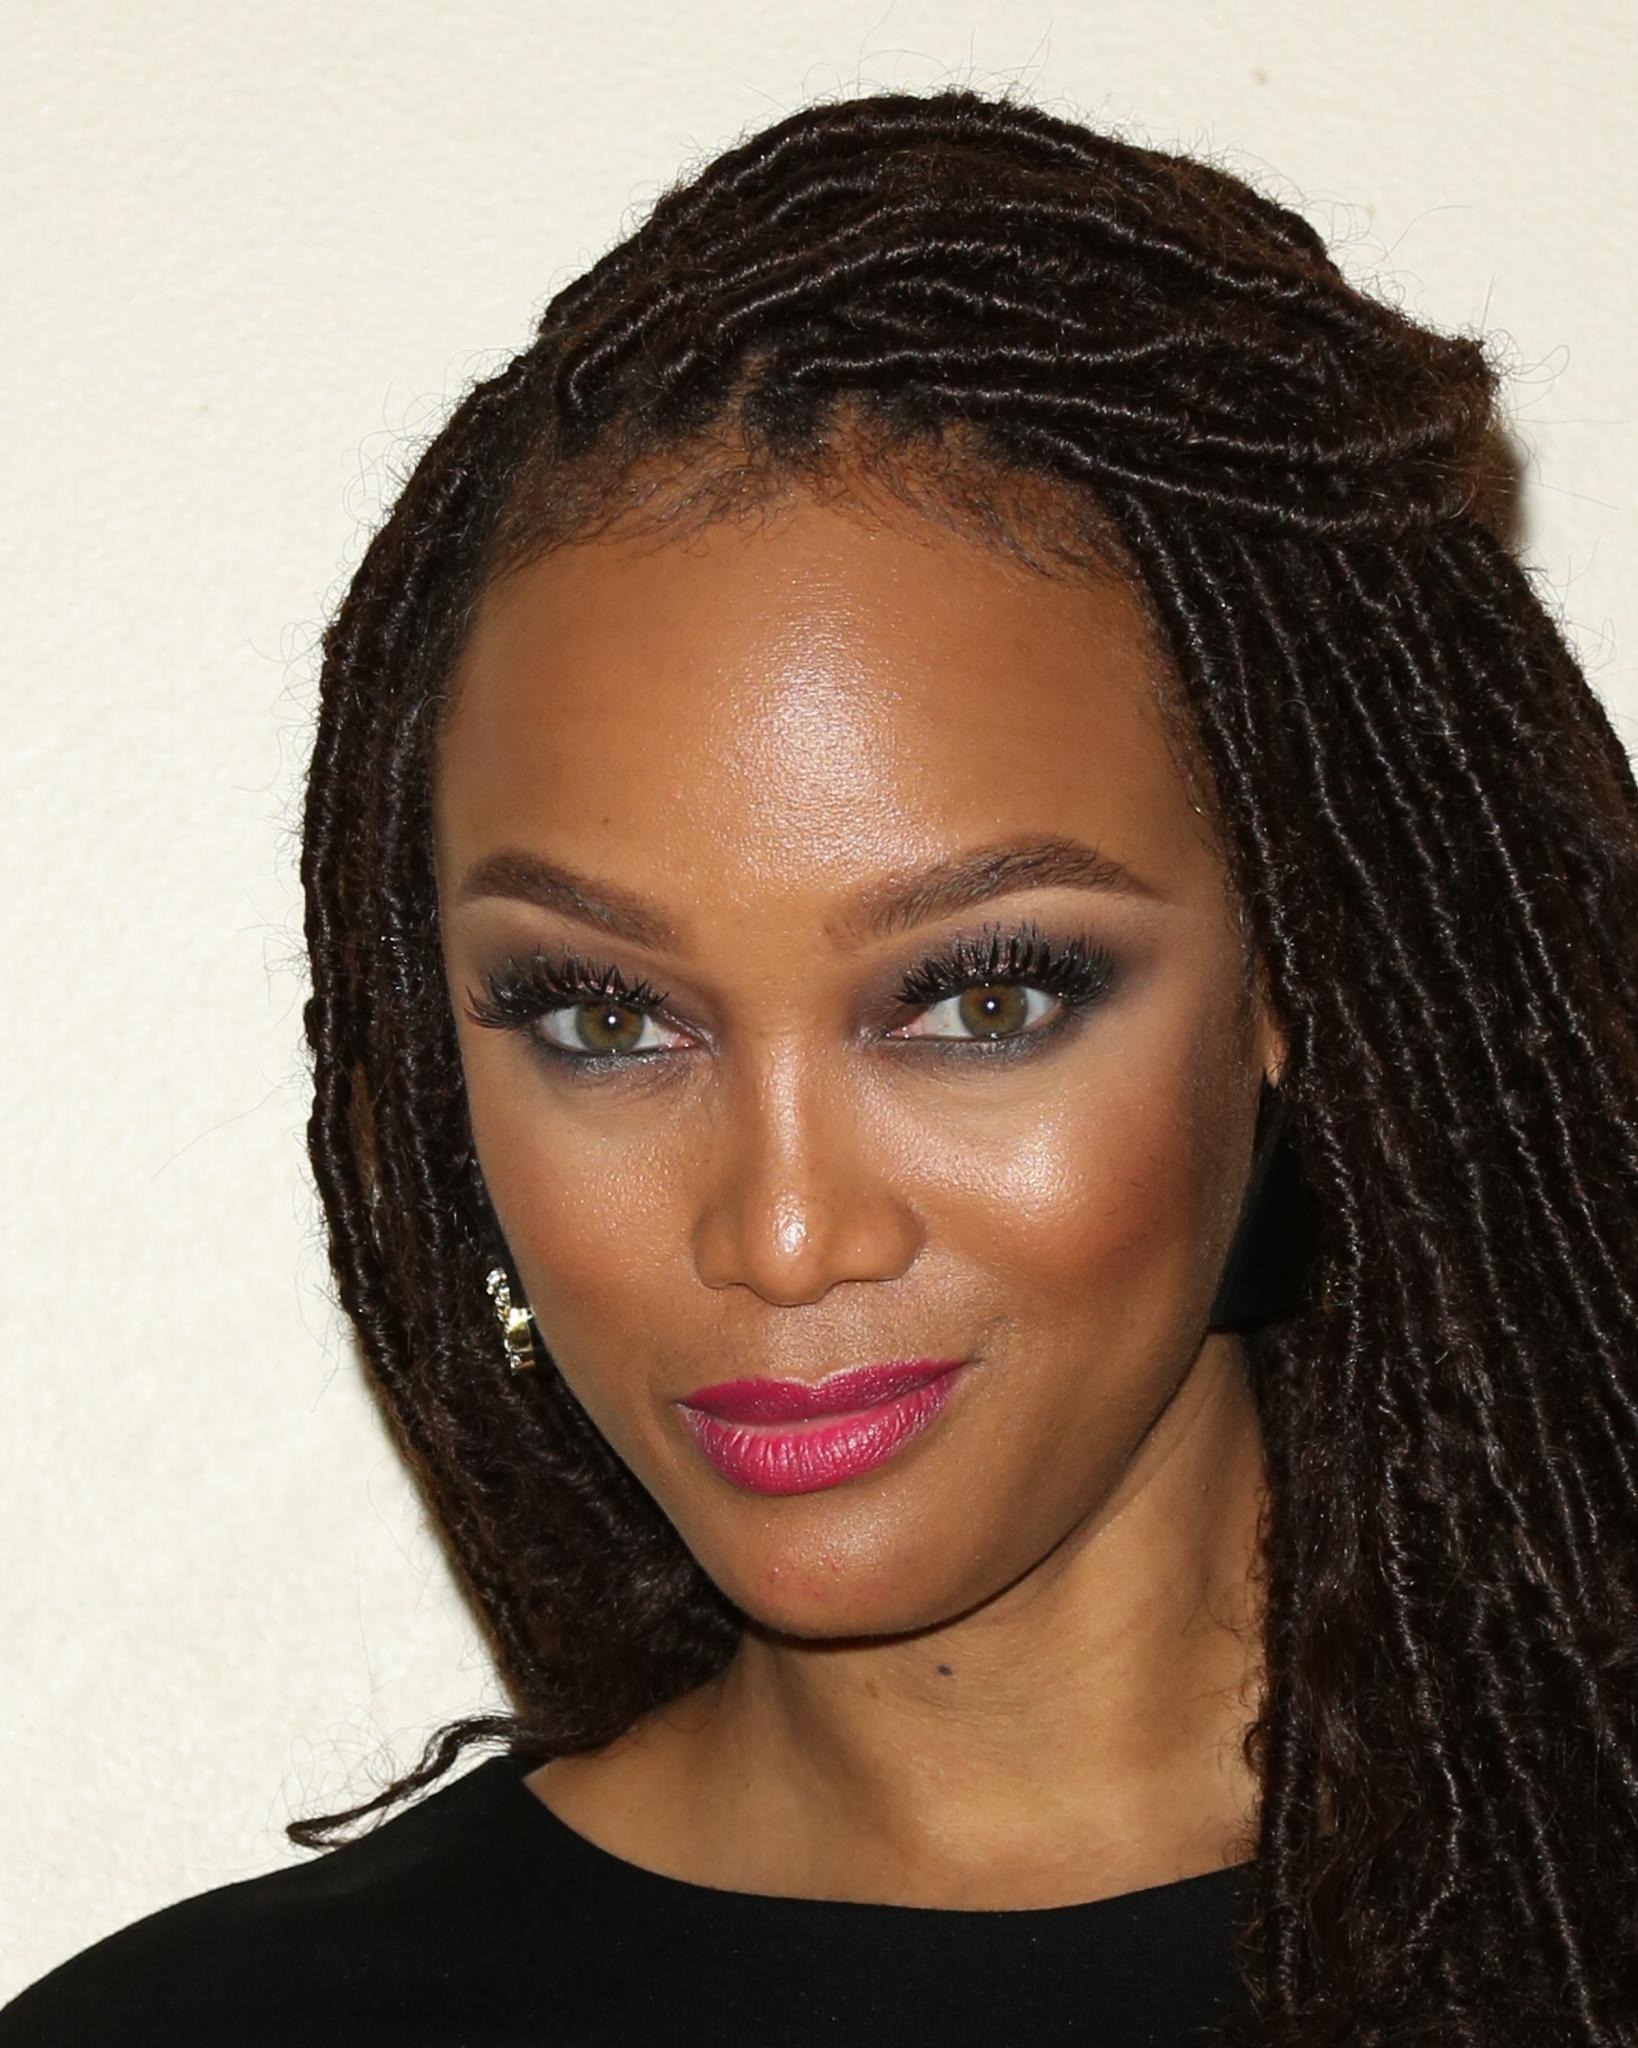 Tyra Banks Is Allegedly The Reason A Couple Is Suing ‘America’s Got Talent’